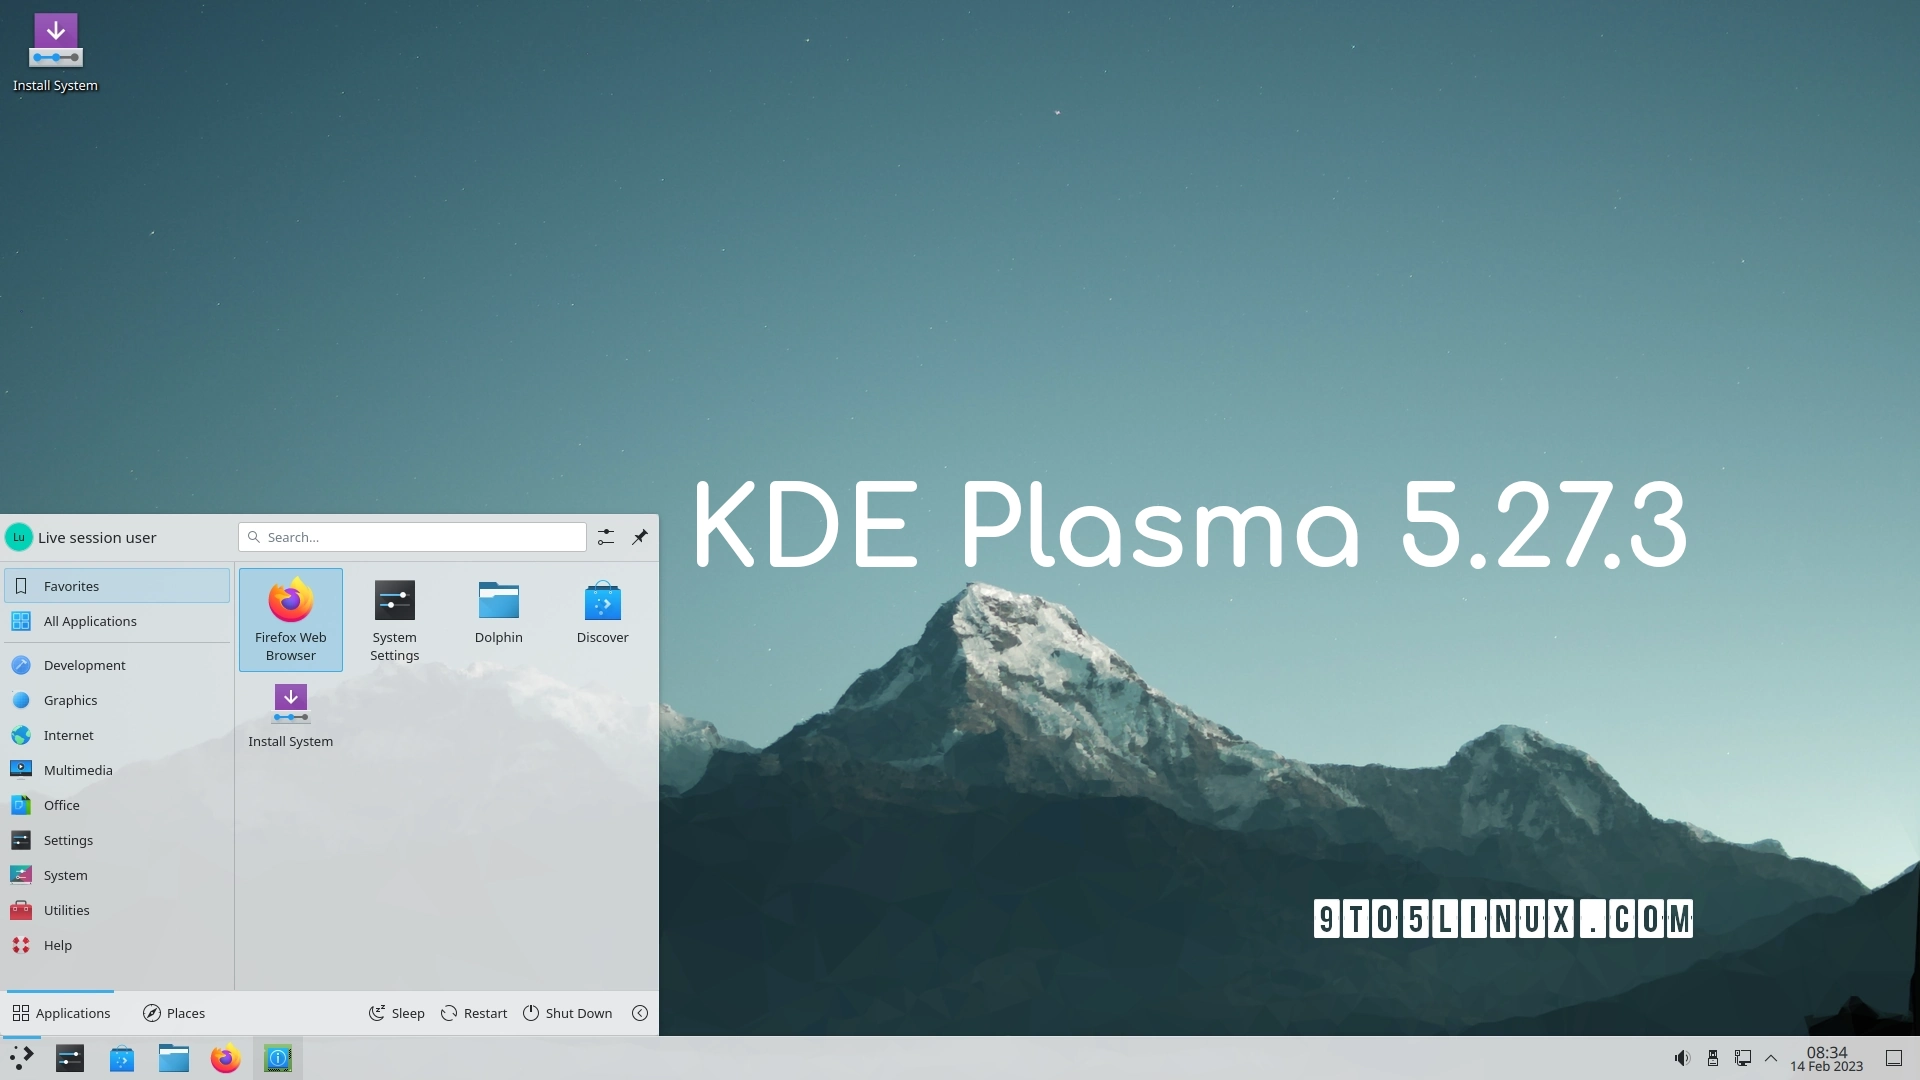 KDE Plasma 5.27.3 Enables Night Light on ARM Devices That Don’t Support Gamma LUTs